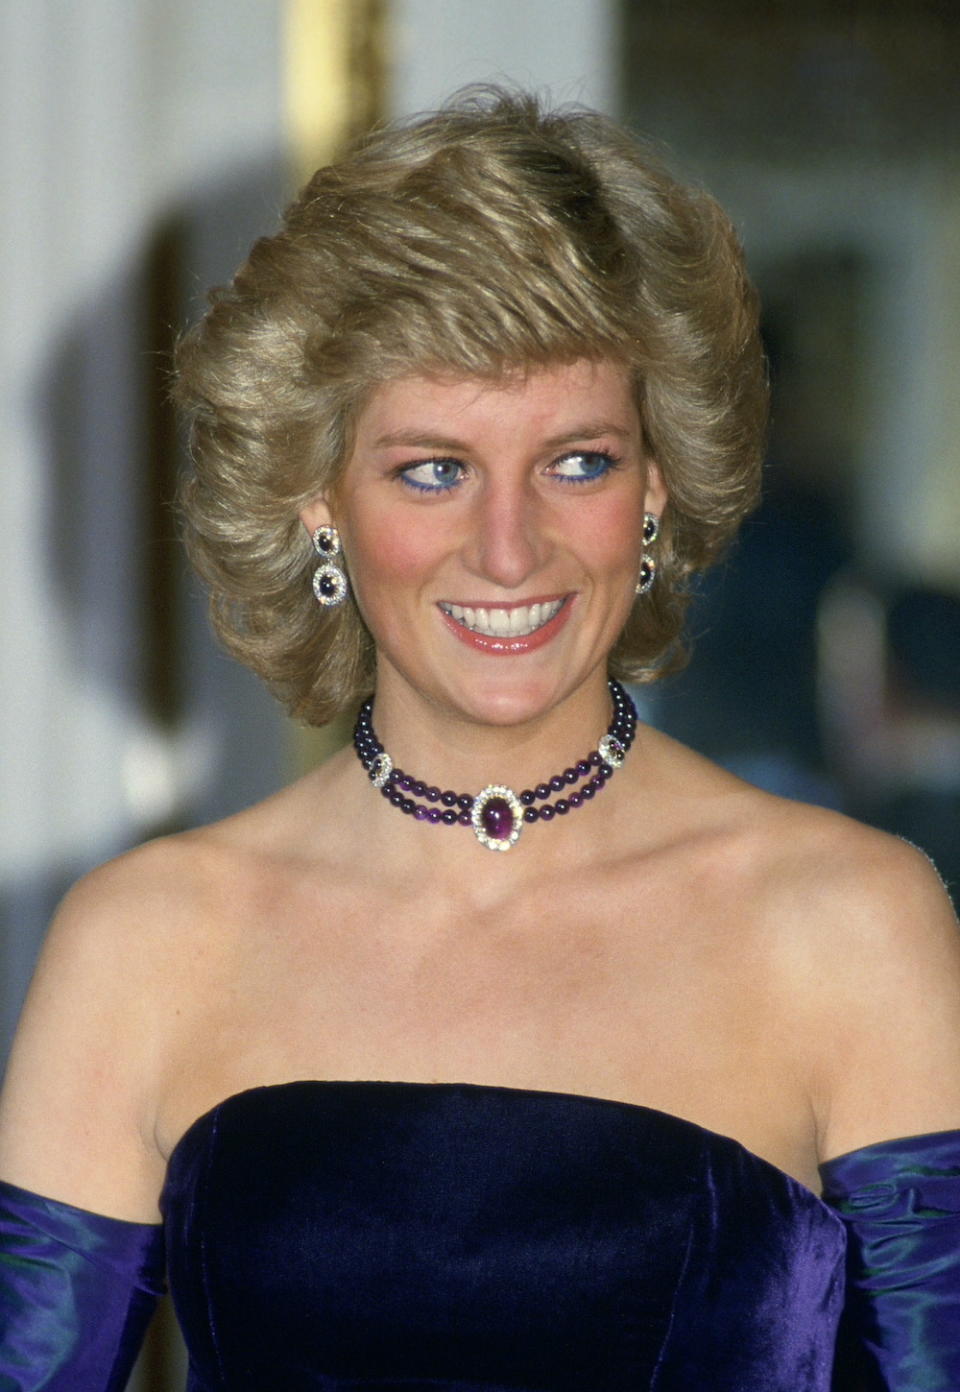 Diana, Princess Of Wales, Wearing A Purple Velvet Sleeveless Evening Dress Designed By Catherine Walker With Matching Choker And Earrings For A Performance Of Mozart's Opera 